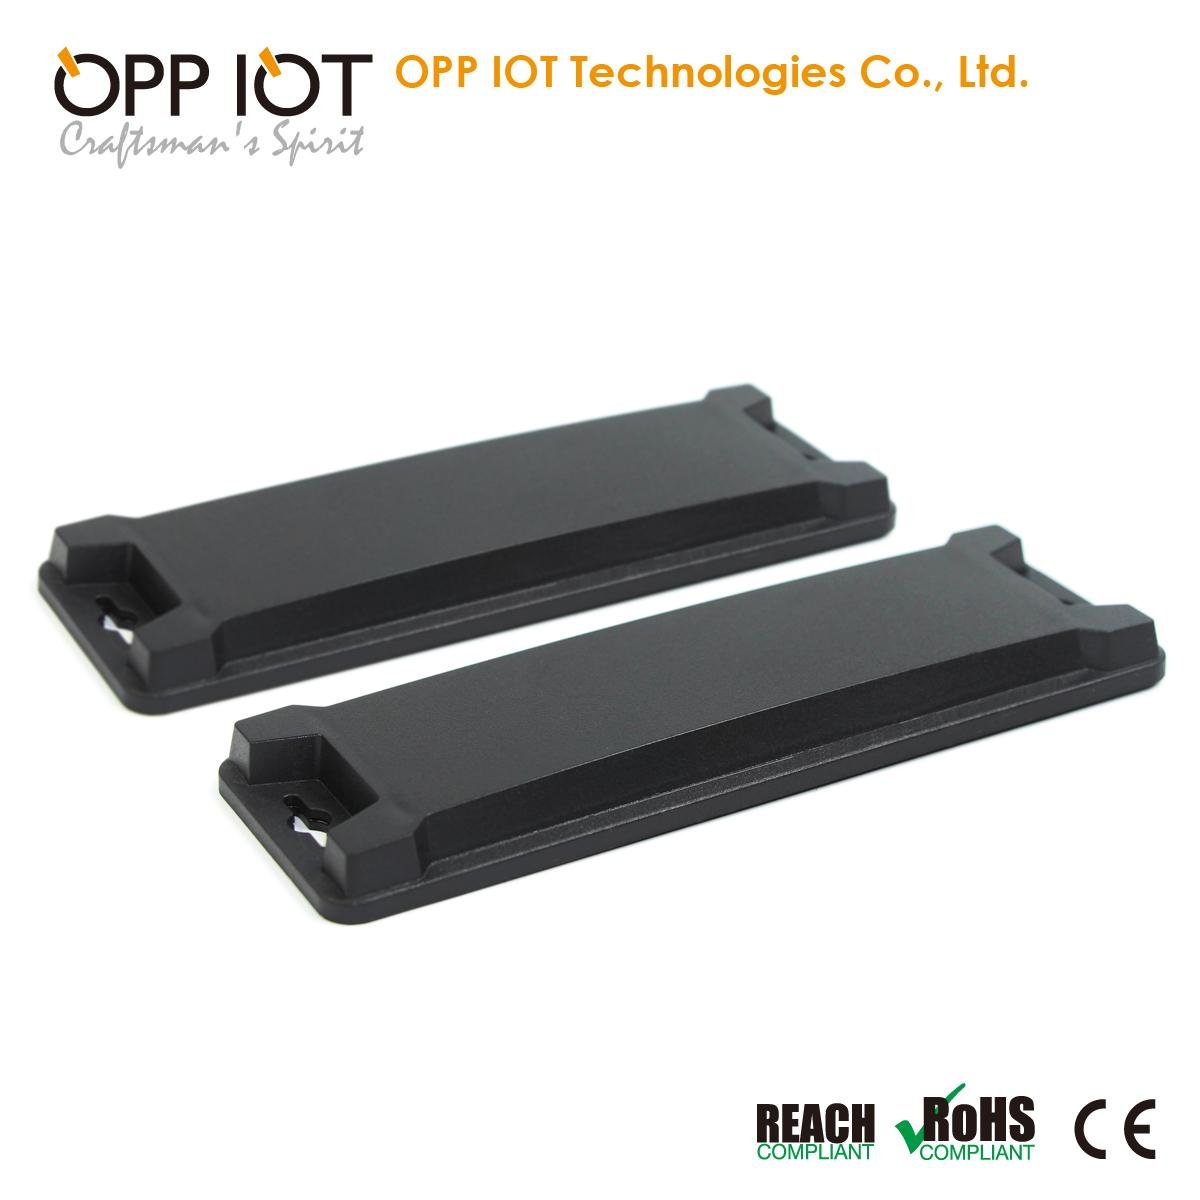 Choose OPP130 Metal Mount RFID tag for its long read range and low profile